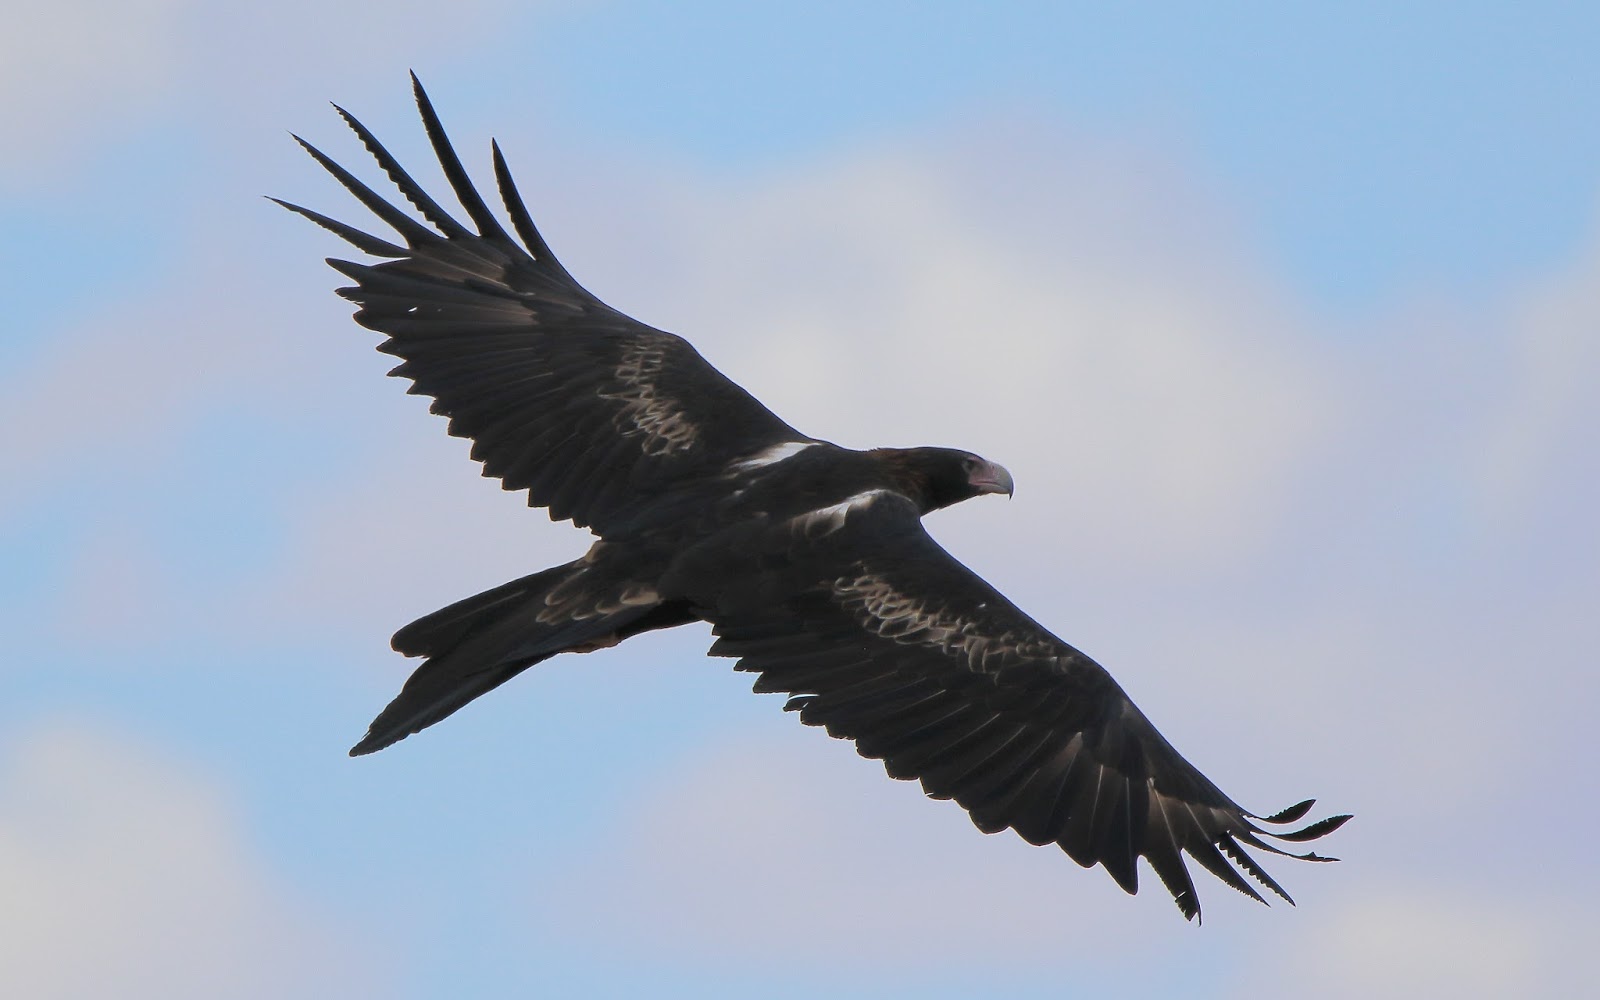 Richard Waring's Birds of Australia: Wedge-tailed Eagles - the Royal ...